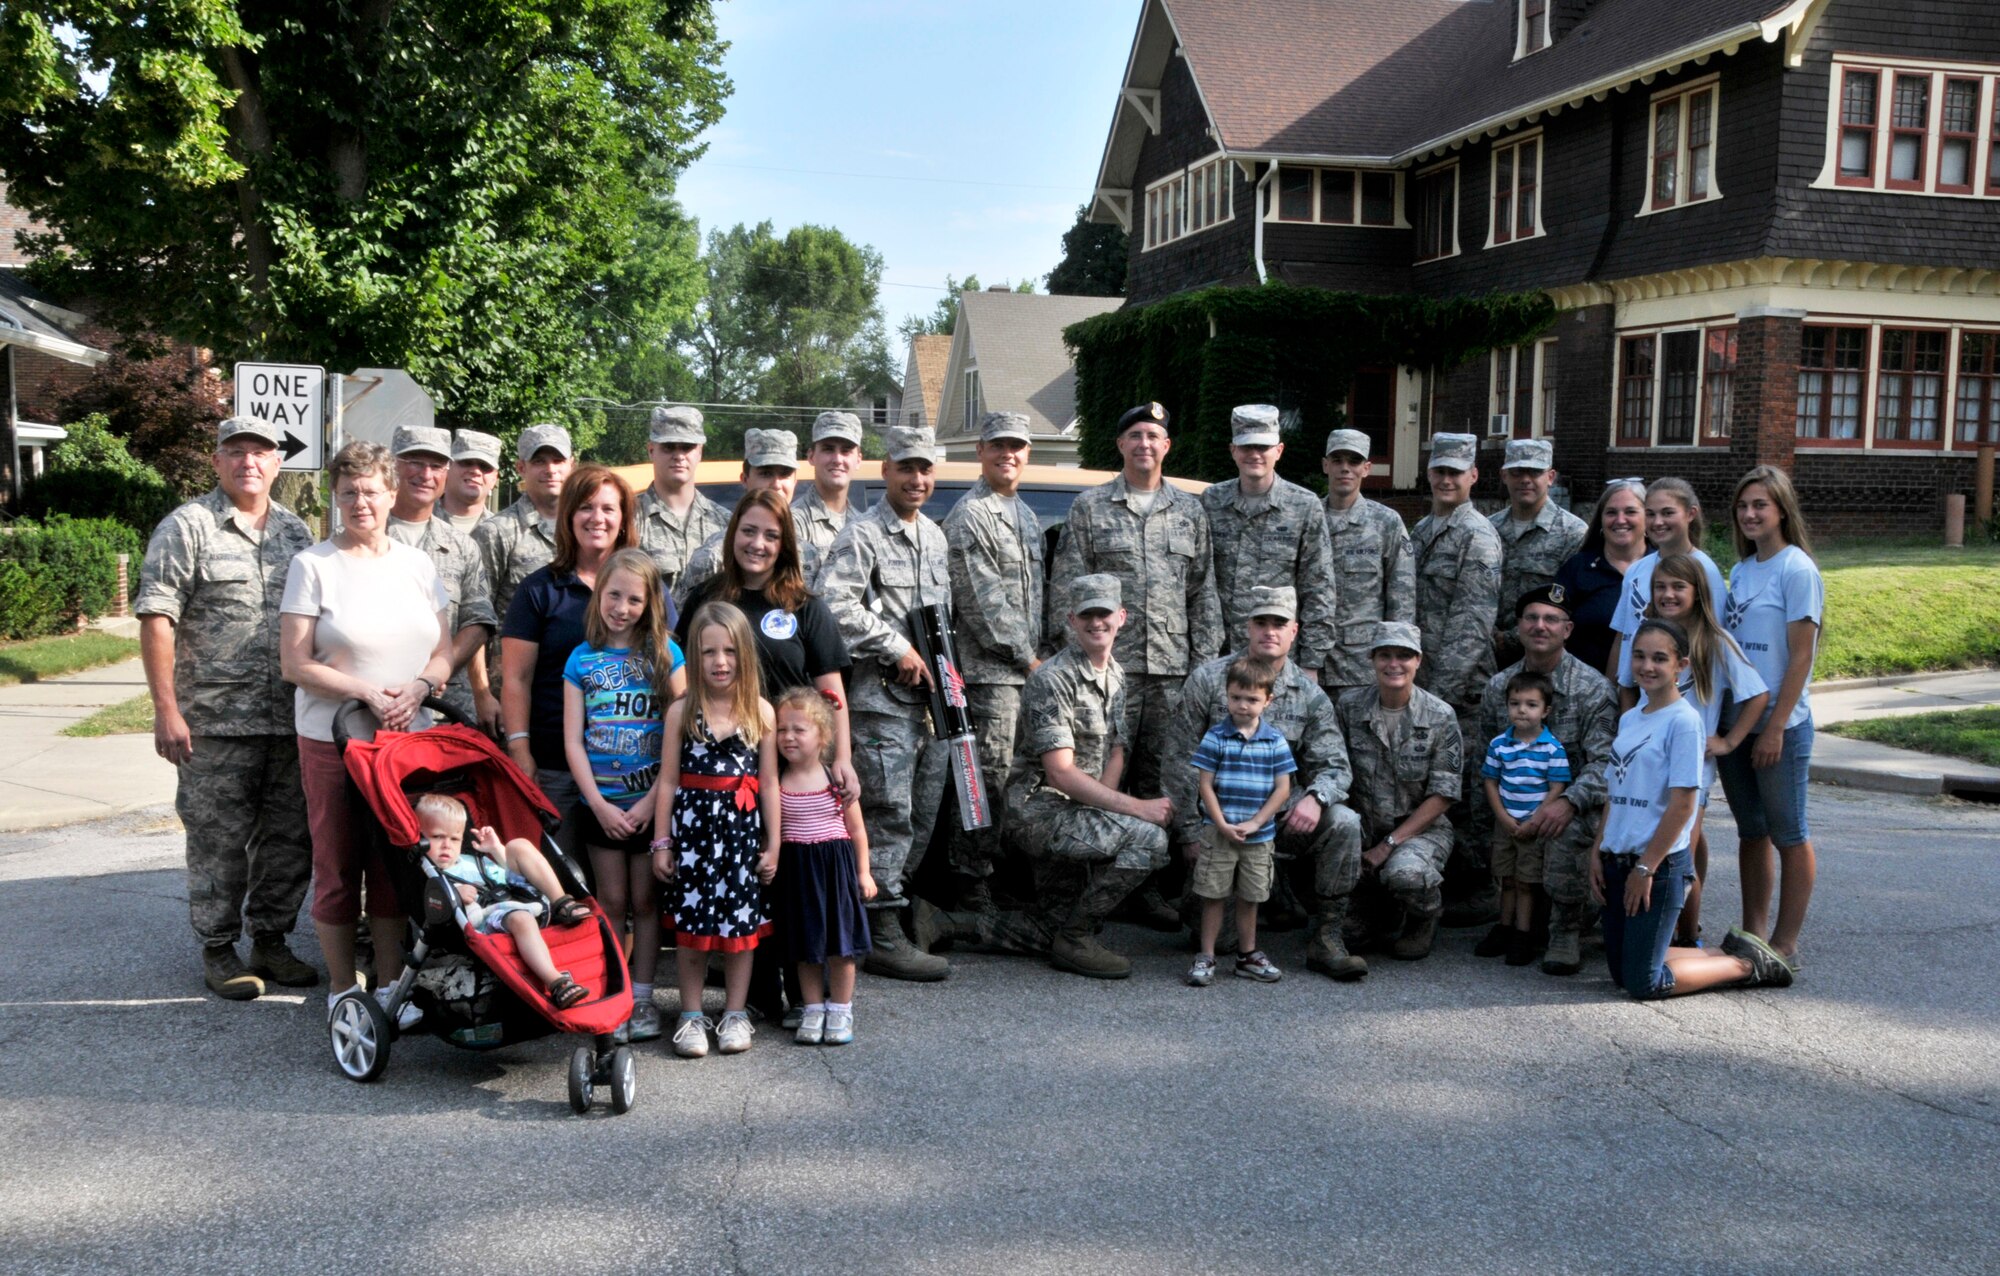 Members and volunteers from the 122nd Fighter Wing, Fort Wayne, Indiana pose for a group photo during the 46th Annual Three Rivers Festival Parade, July 12, 2014, held on the streets of downtown Fort Wayne. The yearly parade, attended by approximately 50,000 people, allows the wing to show its community support. (Air National Guard photo by Airman 1st Class Justin Andras/Released)